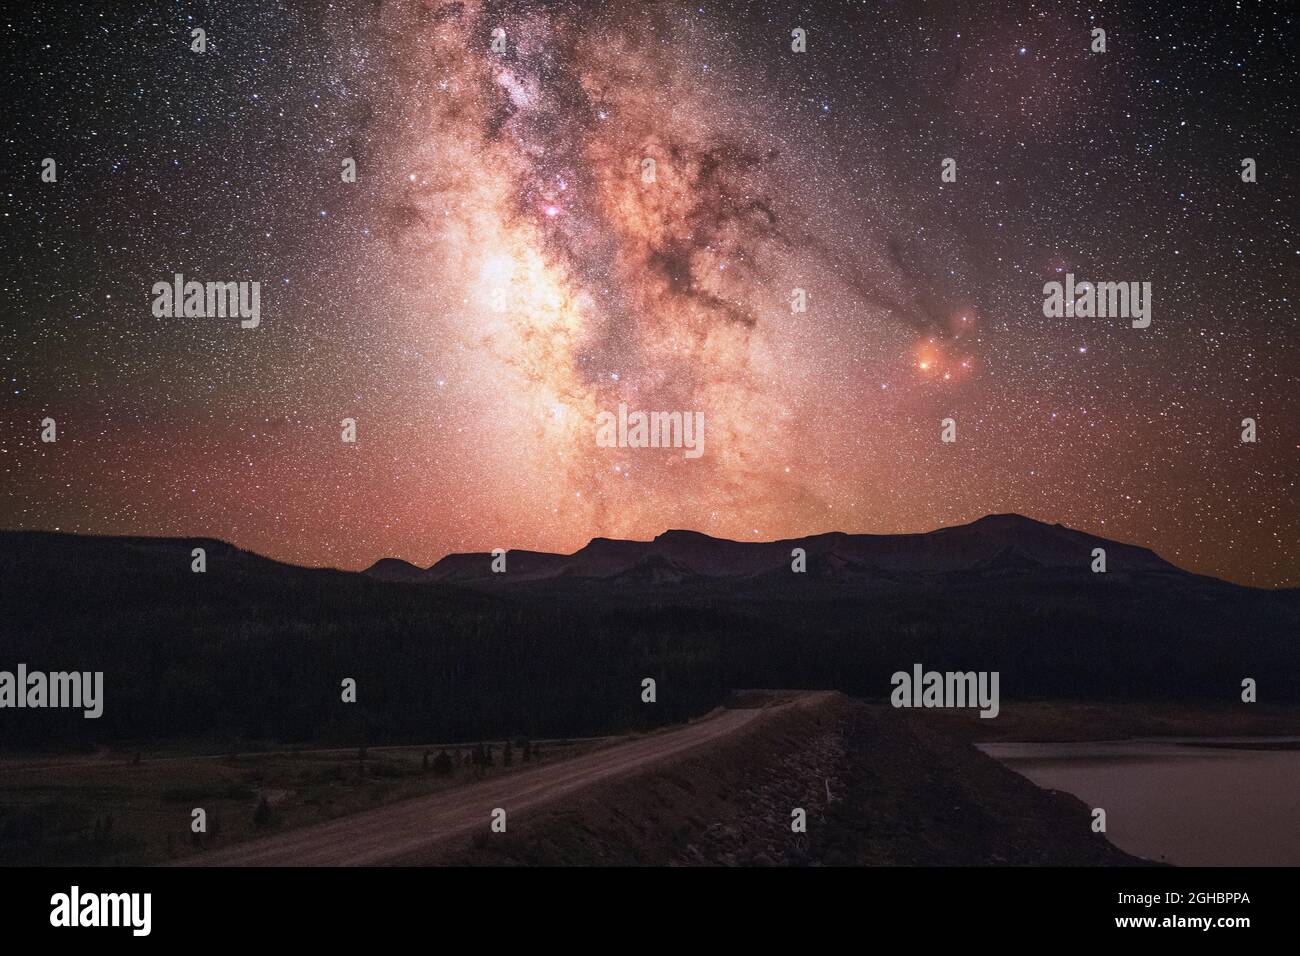 Our milky way galaxy as seen above the flattop mountains in northwest colorado.  Image was taken from a parking lot in the flat tops wilderness area. Stock Photo